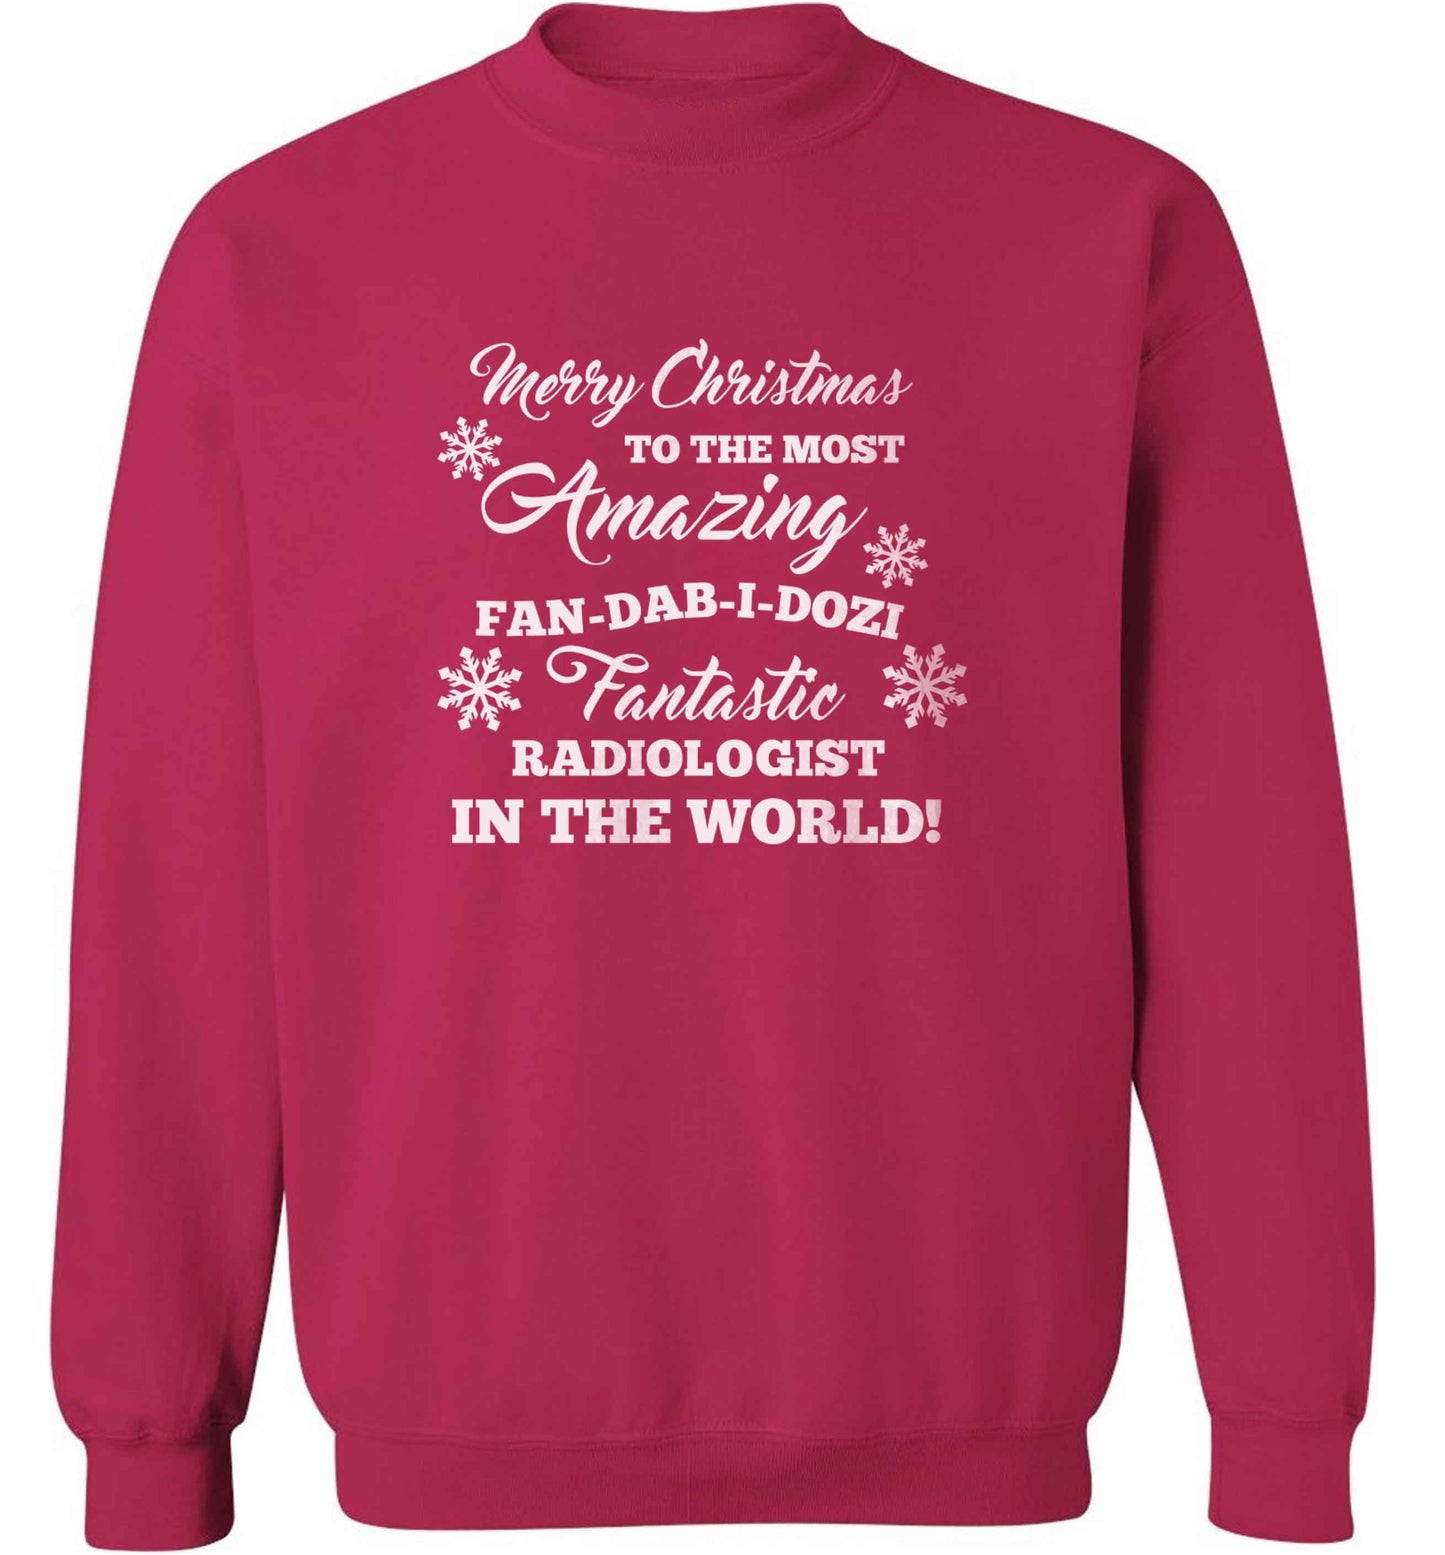 Merry Christmas to the most amazing radiologist in the world! adult's unisex pink sweater 2XL